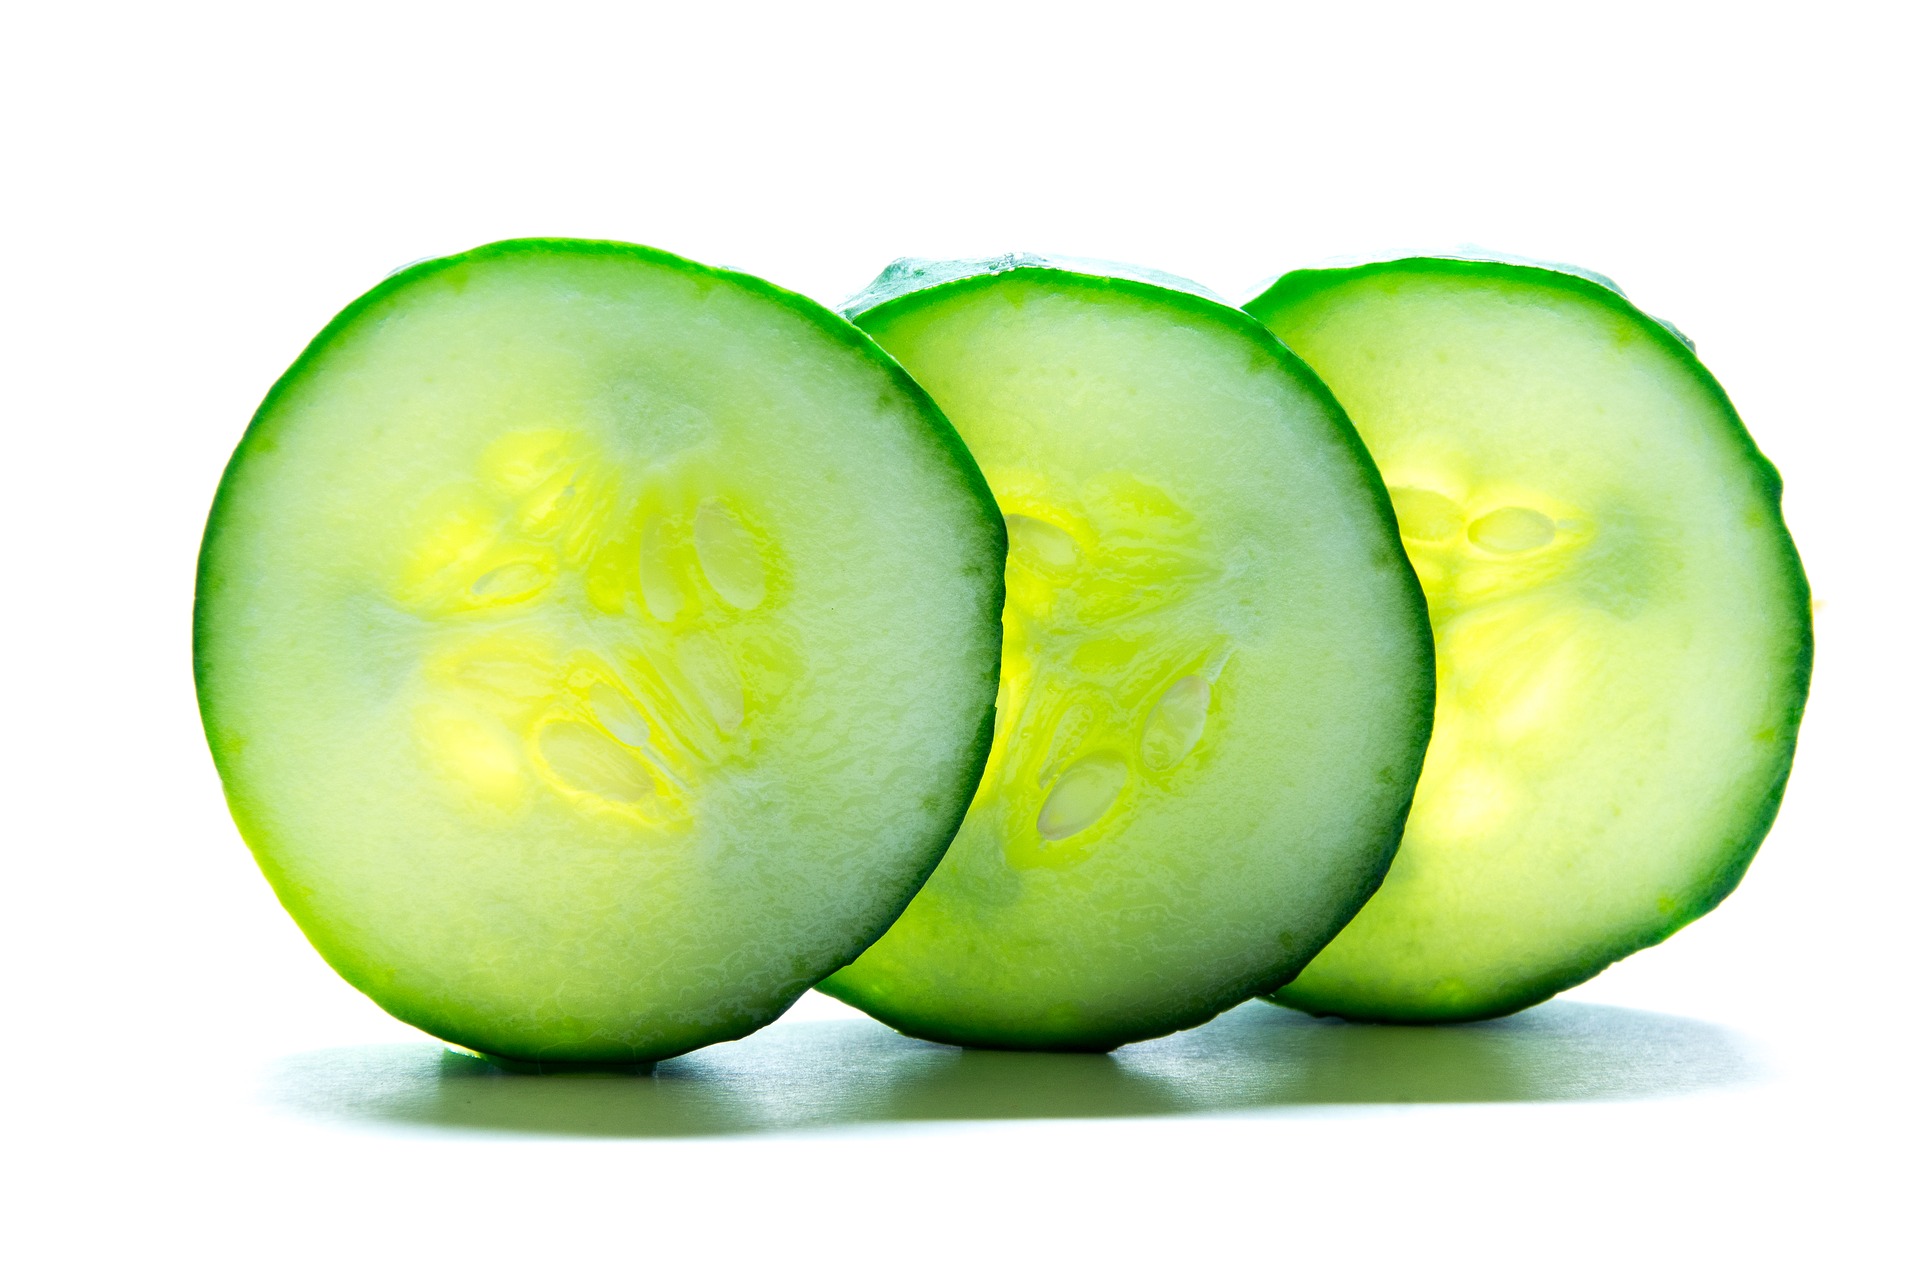 The Health and Beauty Benefits of Cucumber